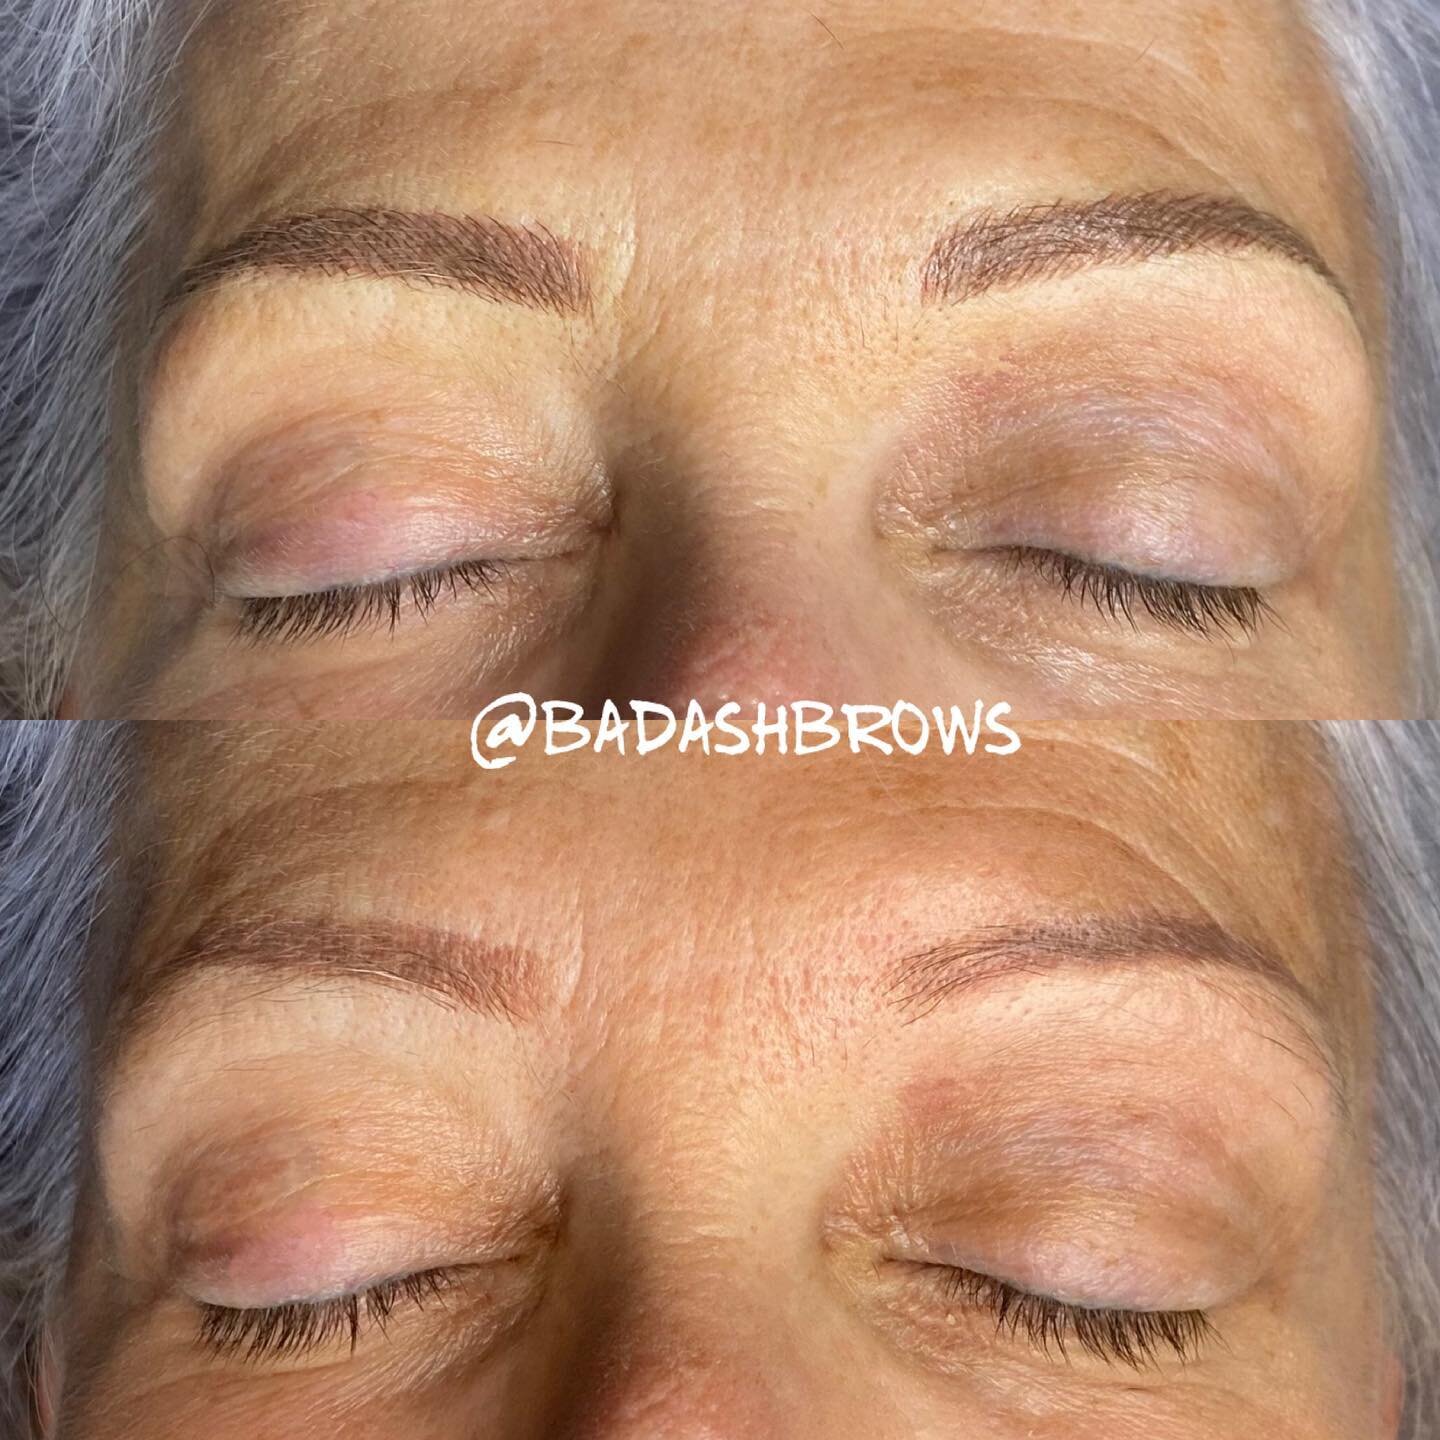 When someone comes in with previously microbladed brows (by someone else) you never know what you&rsquo;re going to see. Thankfully the shape was one we could easily work with. We used ash brown to tone down the existing warmth from her previous work